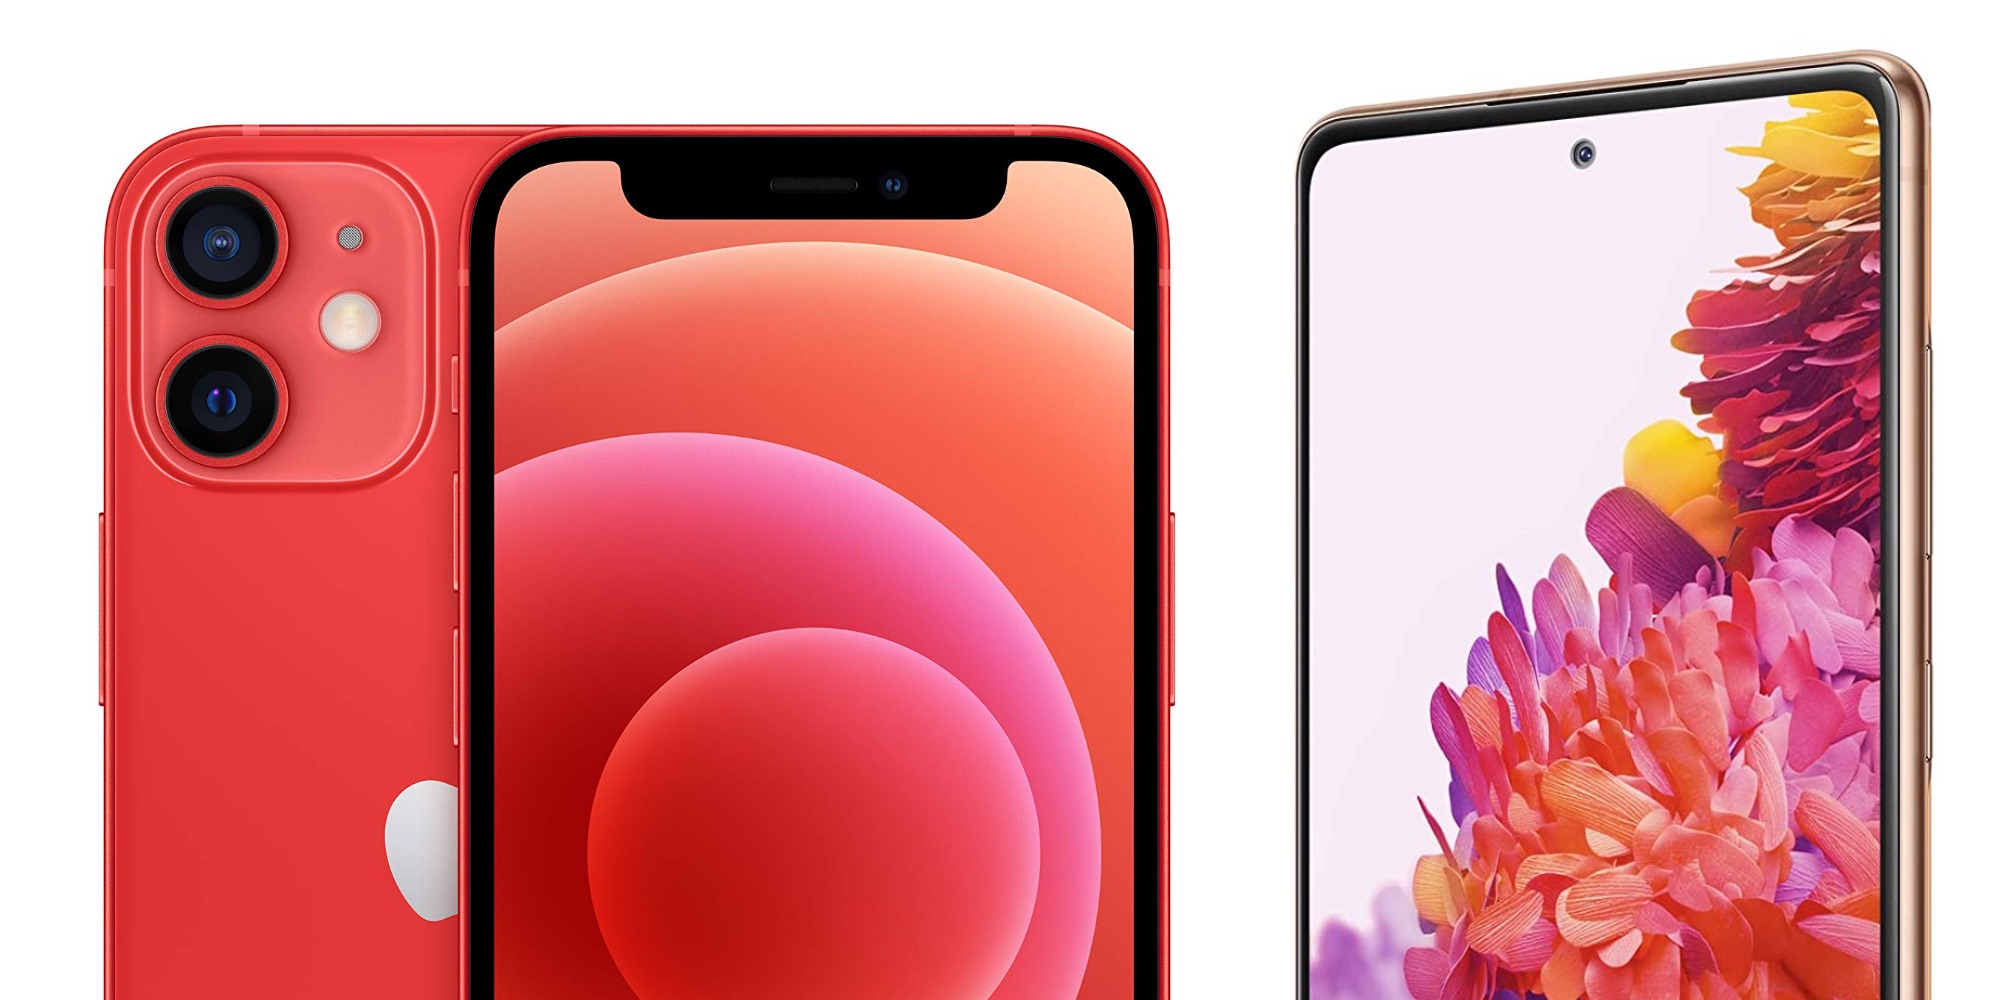 Iphone 14 features notch vs punch hole